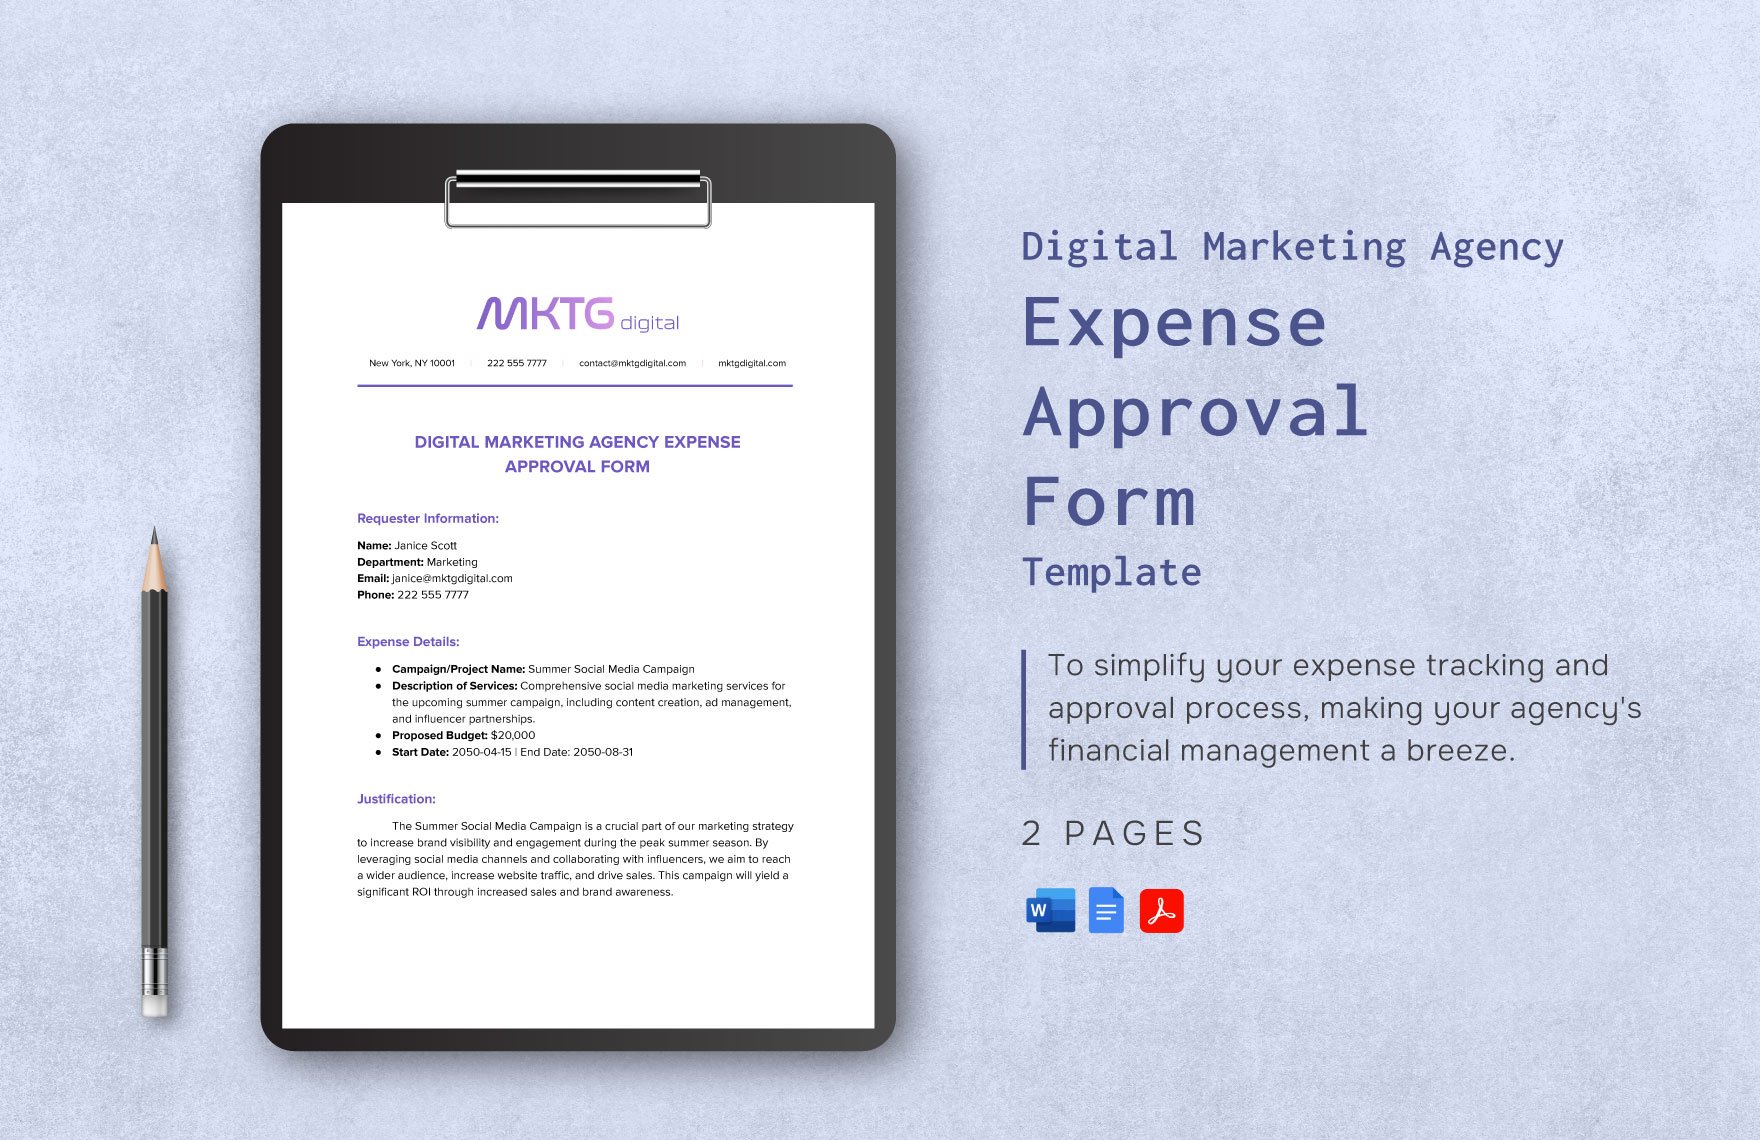 Digital Marketing Agency Expense Approval Form Template in Word, Google Docs, PDF